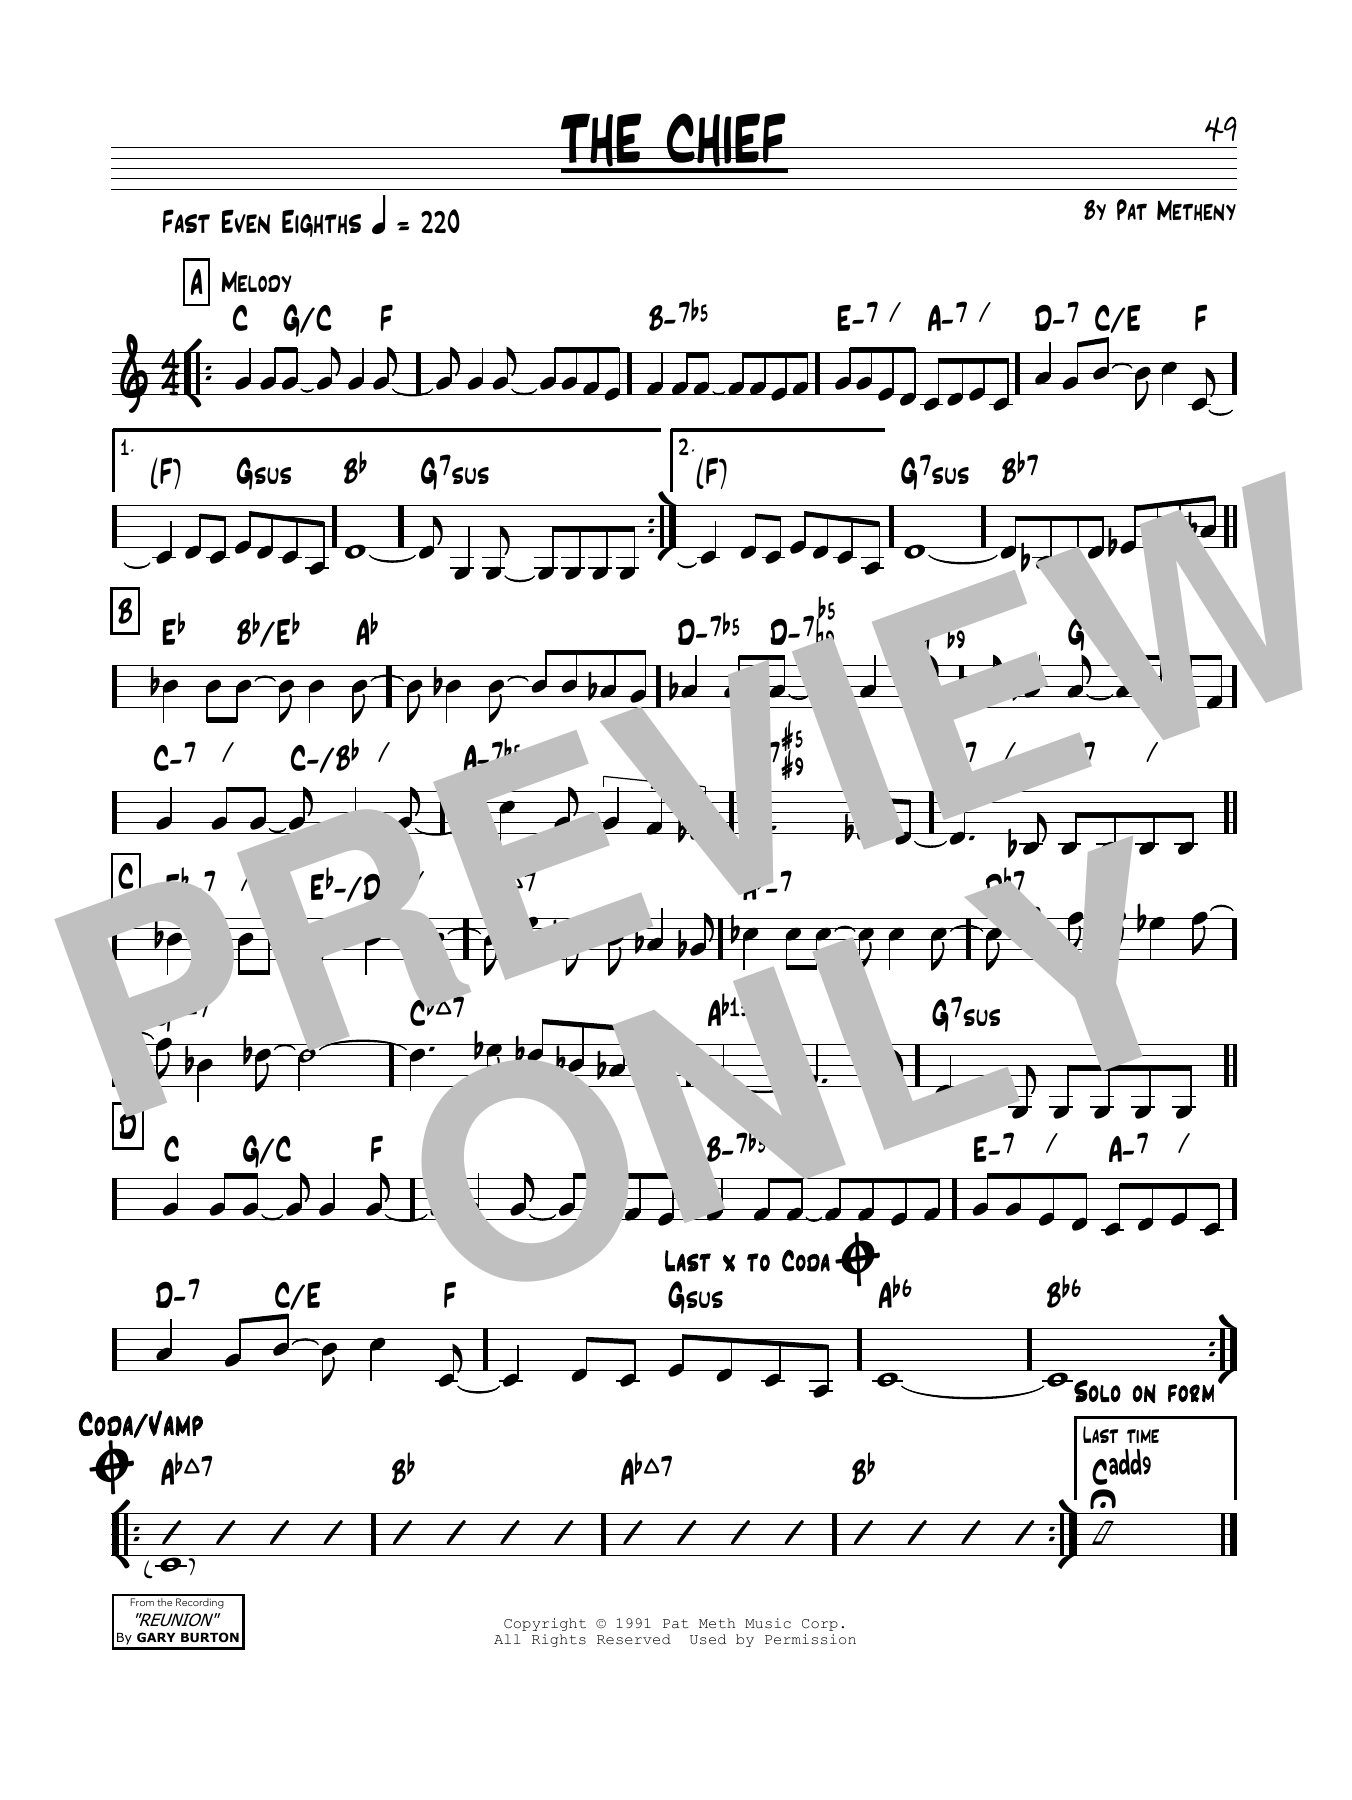 Download Pat Metheny The Chief Sheet Music